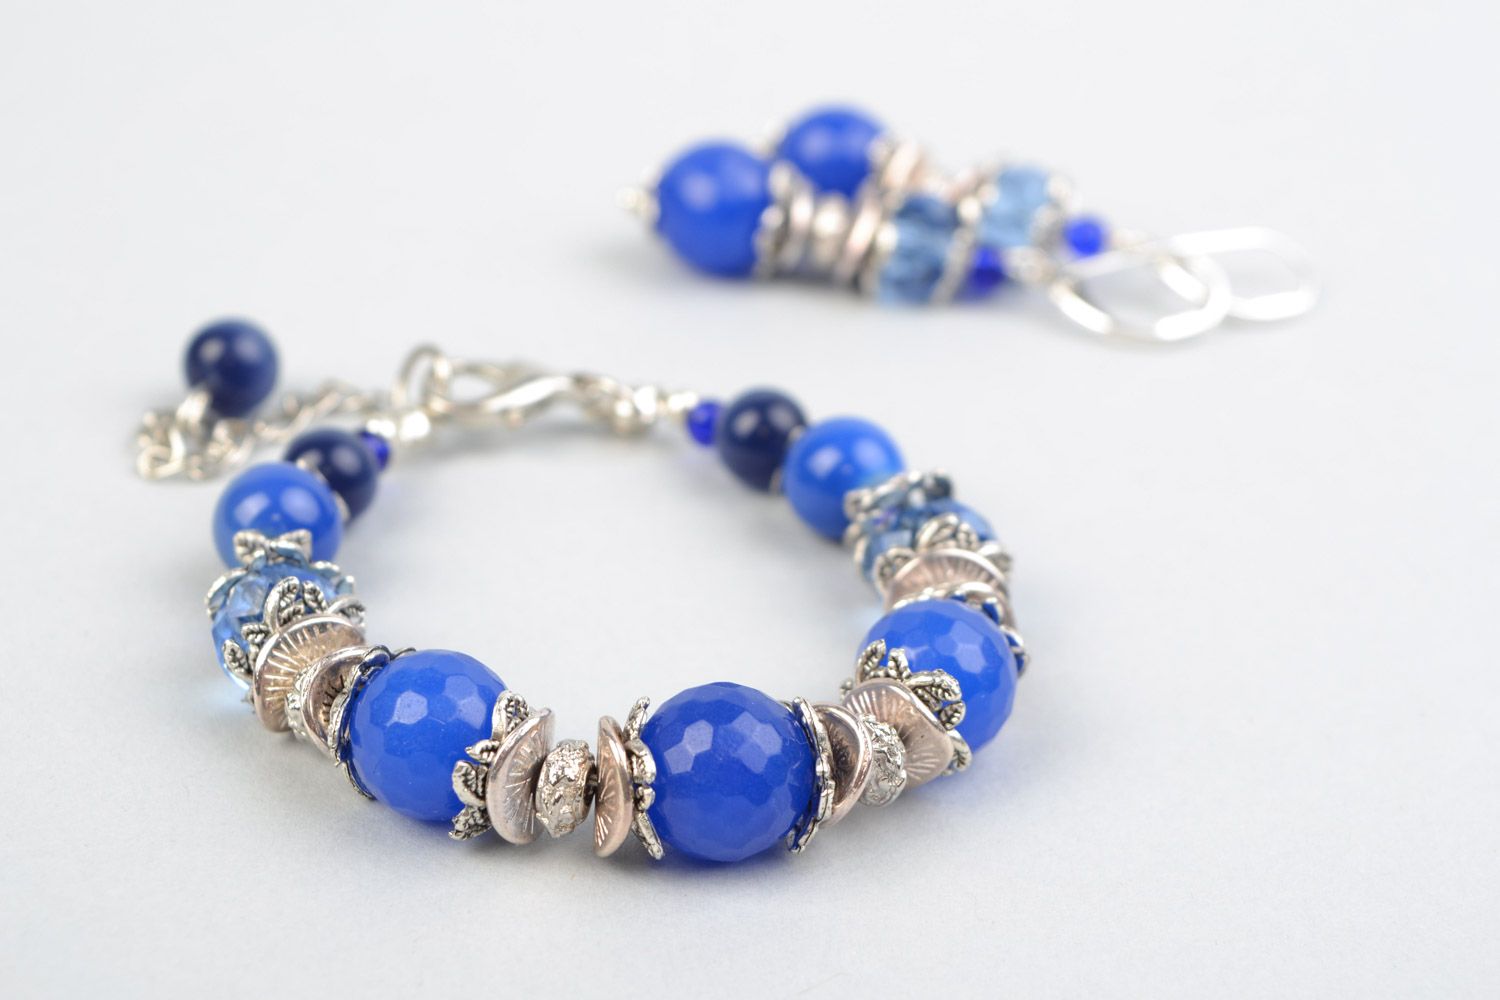 Handmade jewelry set with agate and glass beads in blue color earrings and bracelet photo 4